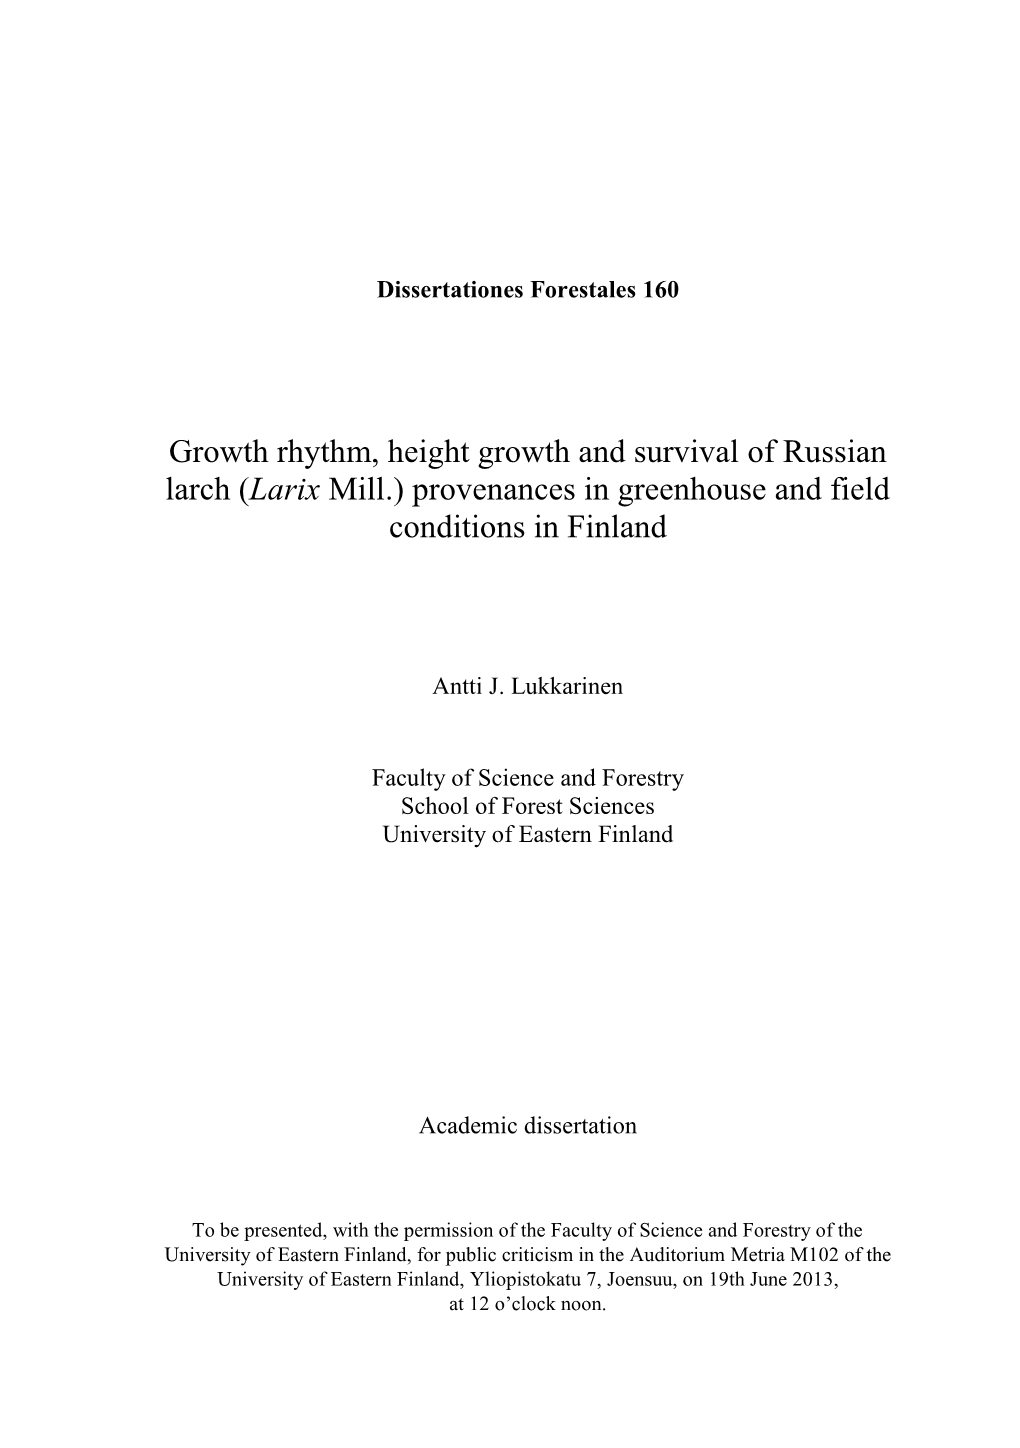 Growth Rhythm, Height Growth and Survival of Russian Larch (Larix Mill.) Provenances in Greenhouse and Field Conditions in Finland